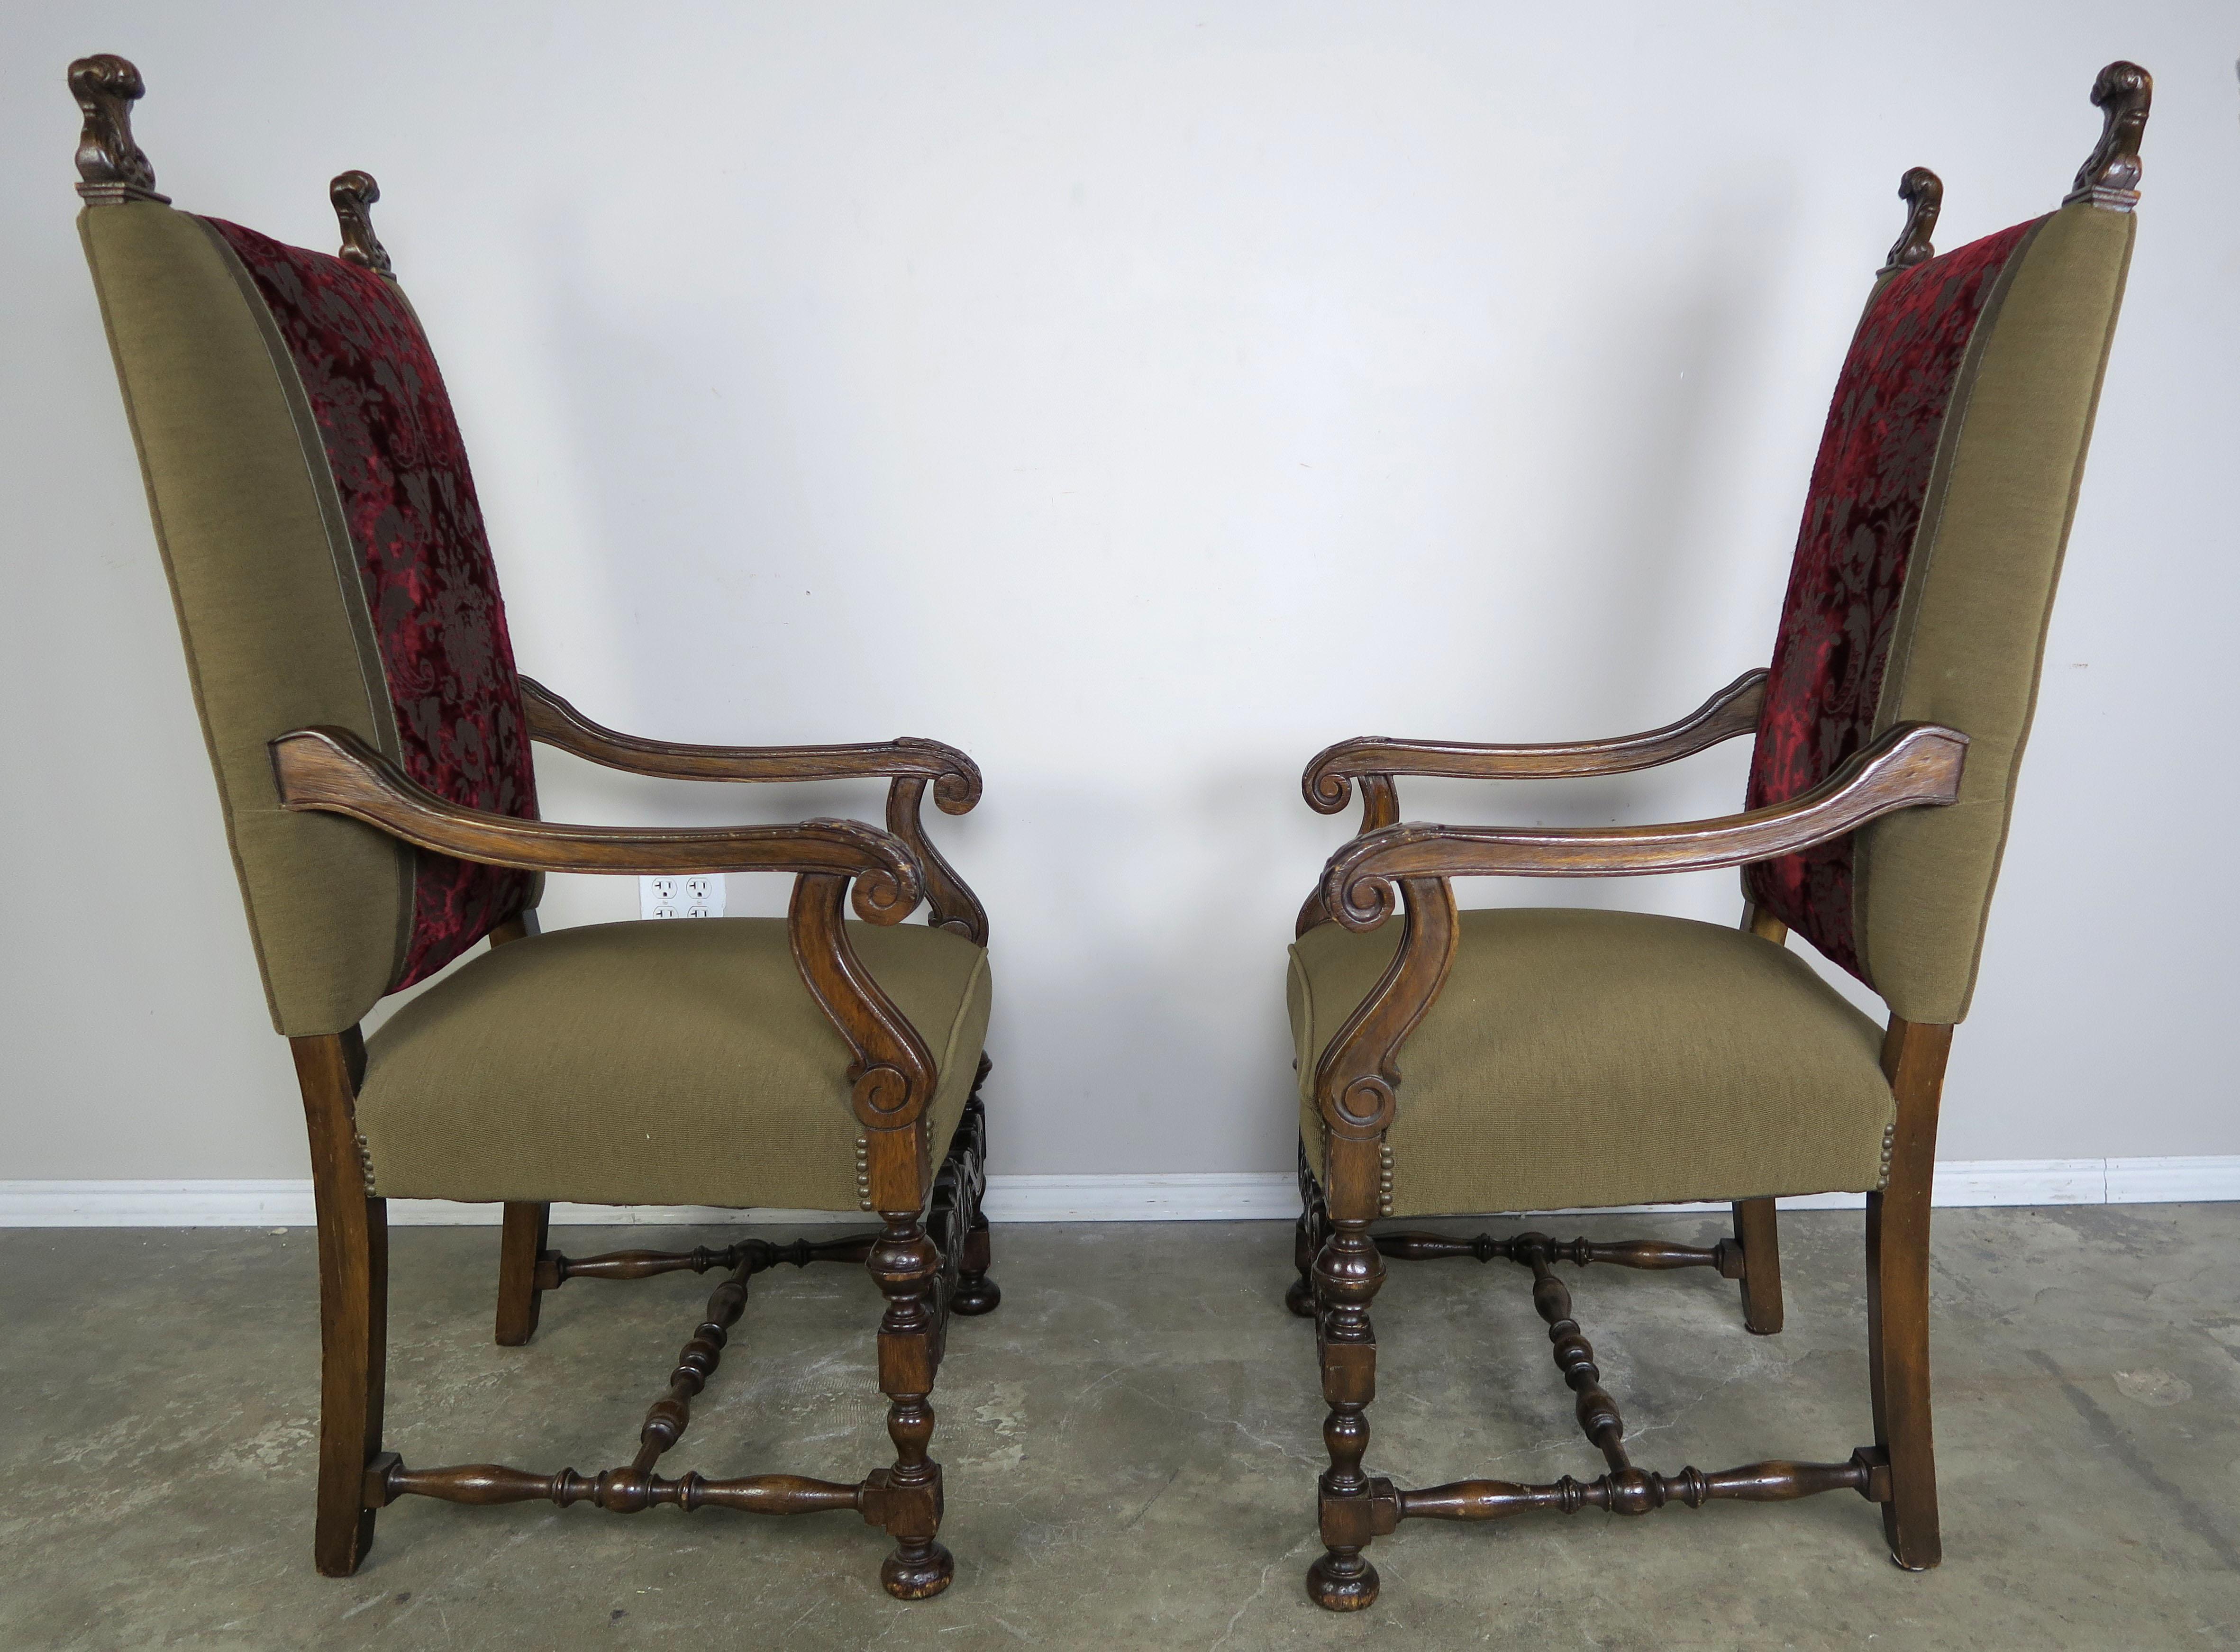 Exceptional pair of antique French Louis XIII style armchairs, or sometimes referred to as a throne chairs. Typically, you might see these in oak or beech wood, but rarely would you find an antique Louis XIII style armchair, in a beautiful figured